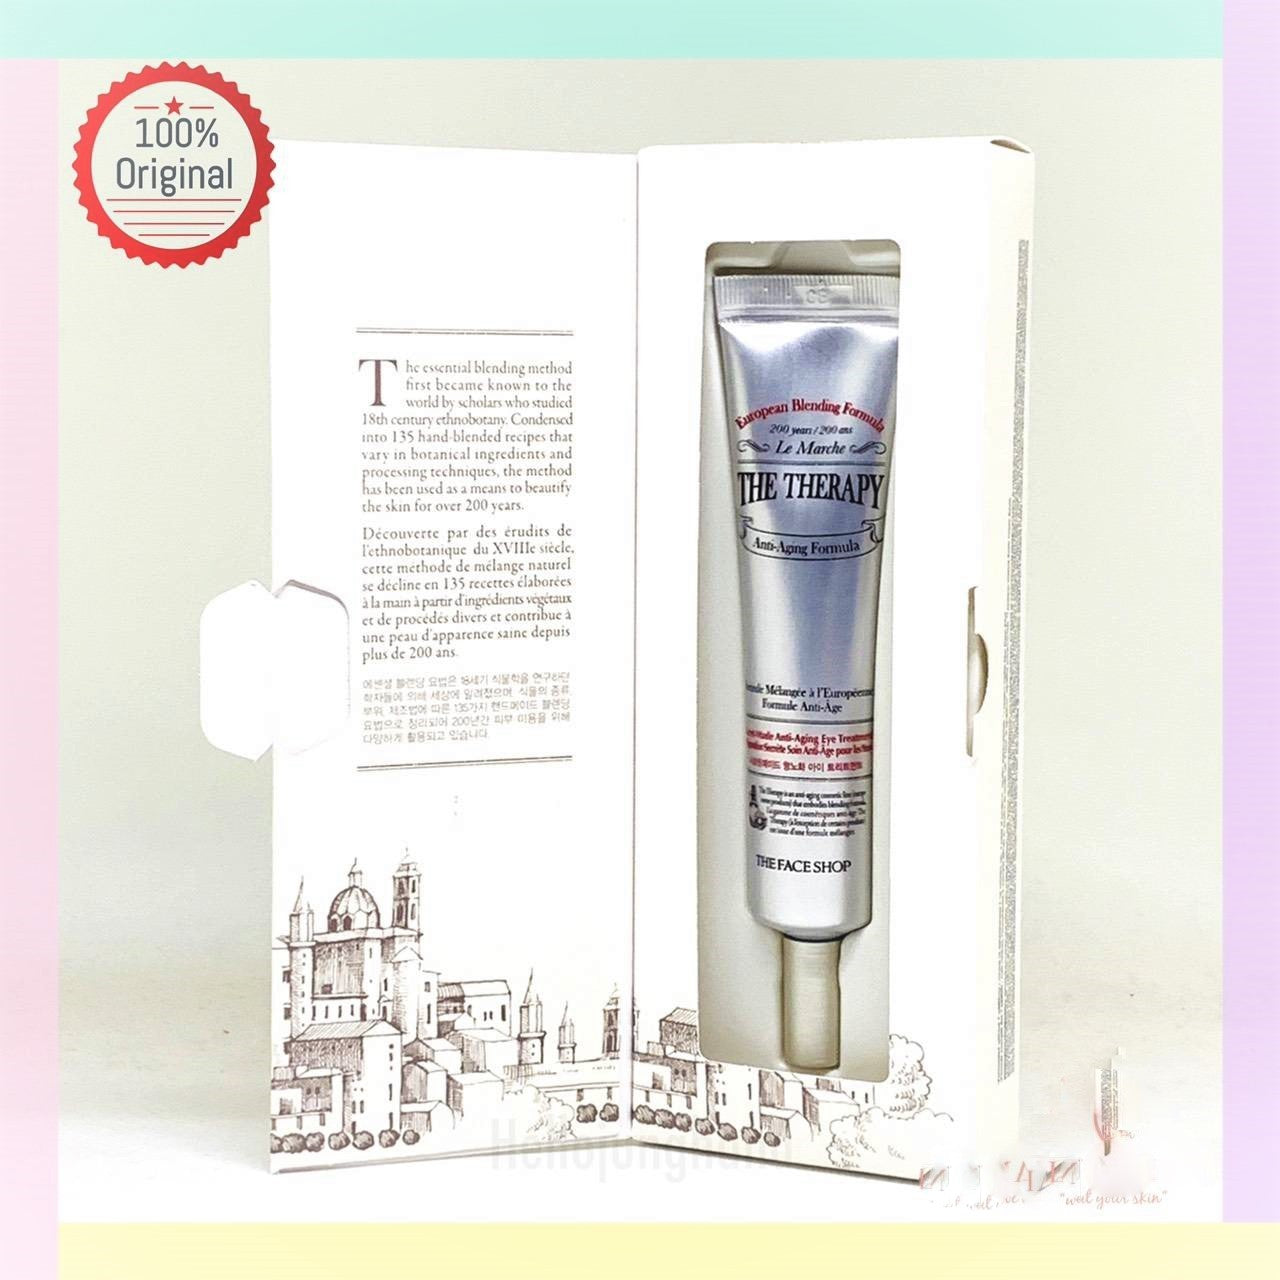 The Face Shop The Therapy Secret made Anti Aging Eye Treatment - 25ml